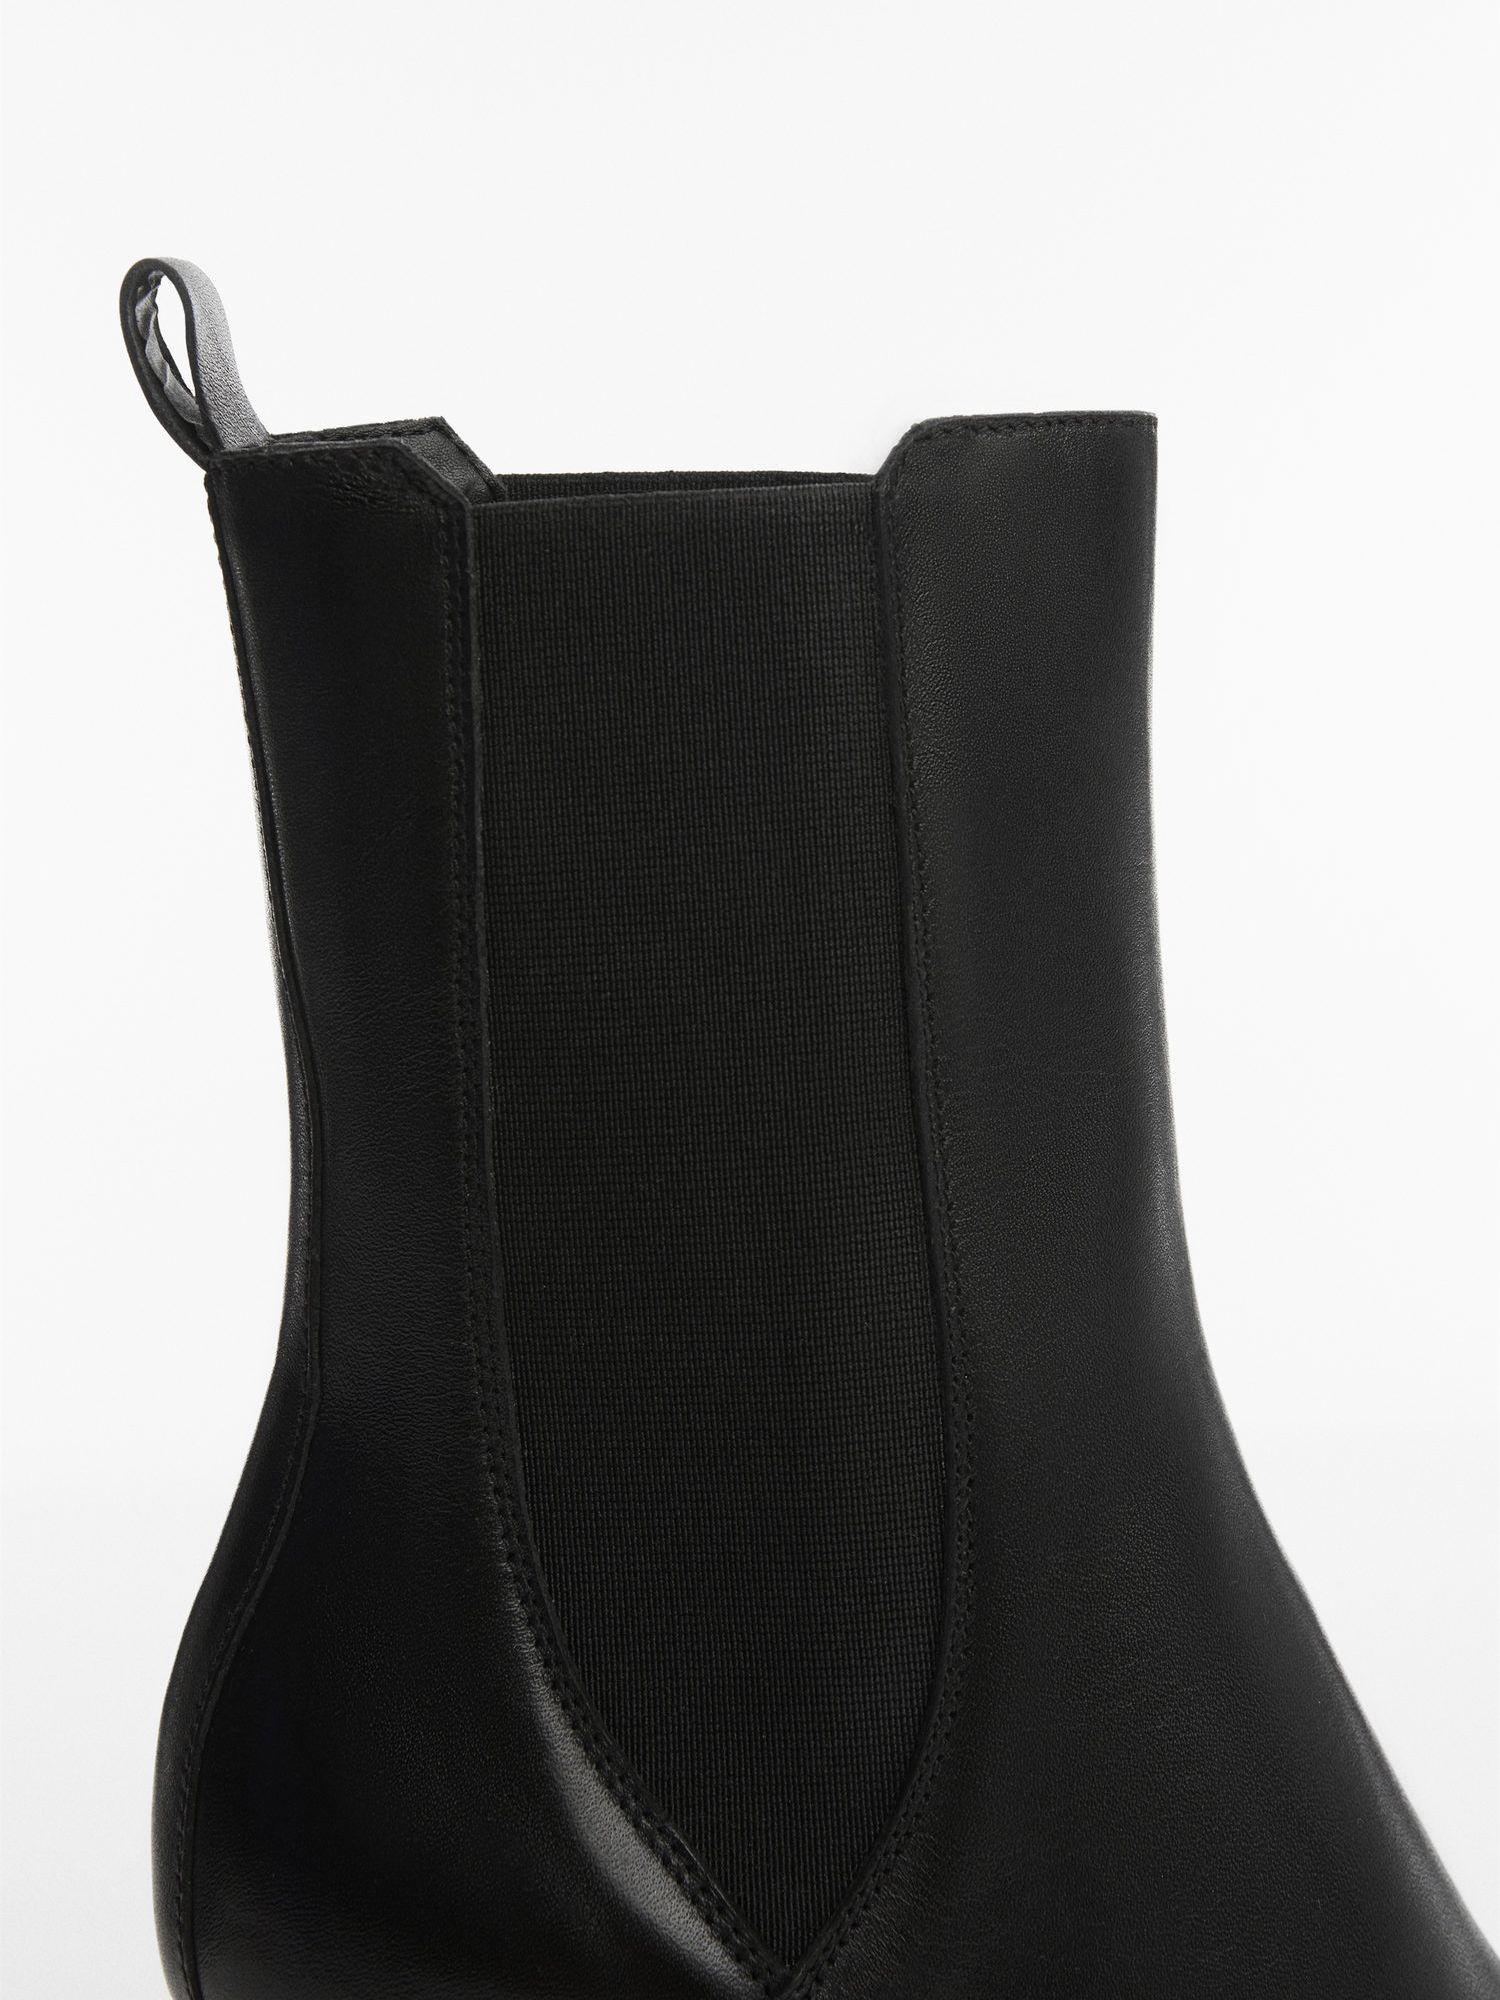 Mango Bandy Leather Blend Ankle Boots, Black at John Lewis & Partners